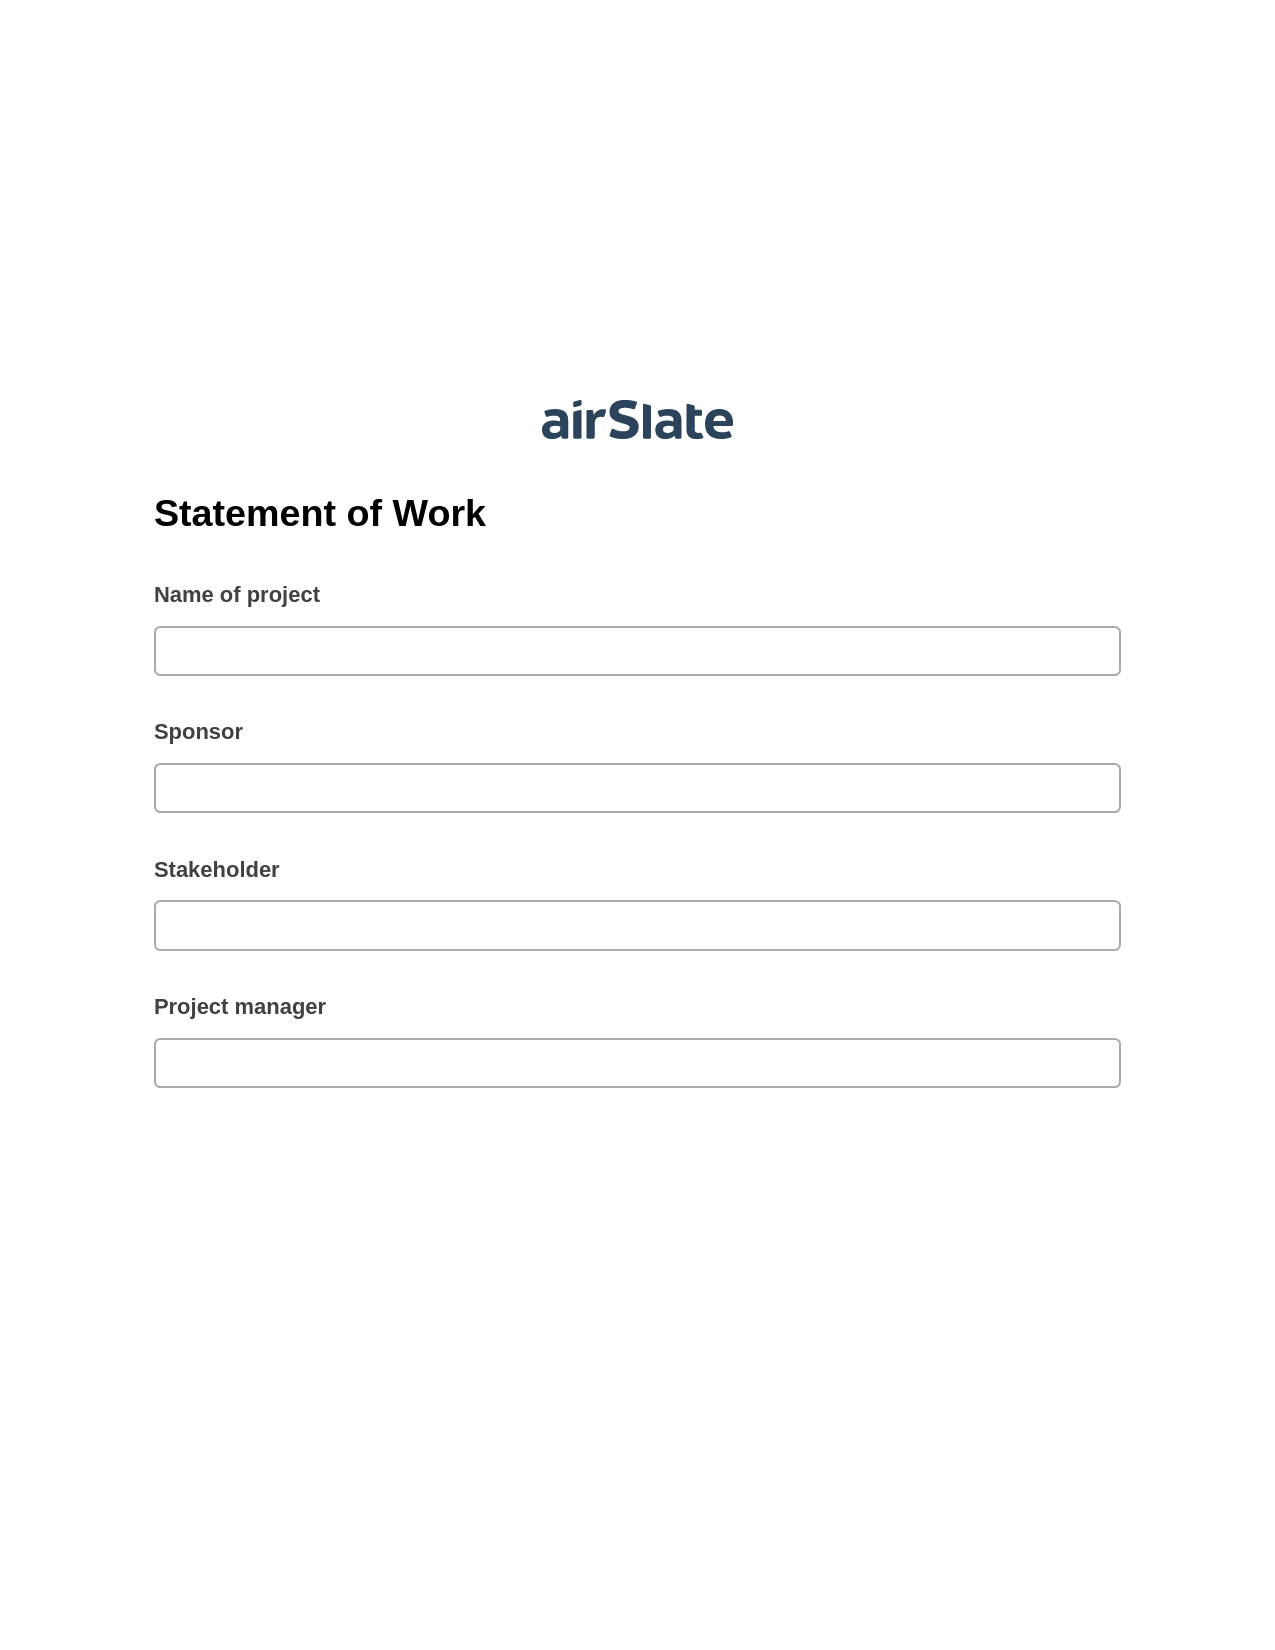 Statement of Work Pre-fill Dropdown from Airtable, Create Slate every Google Sheet Update Bot, Archive to SharePoint Folder Bot